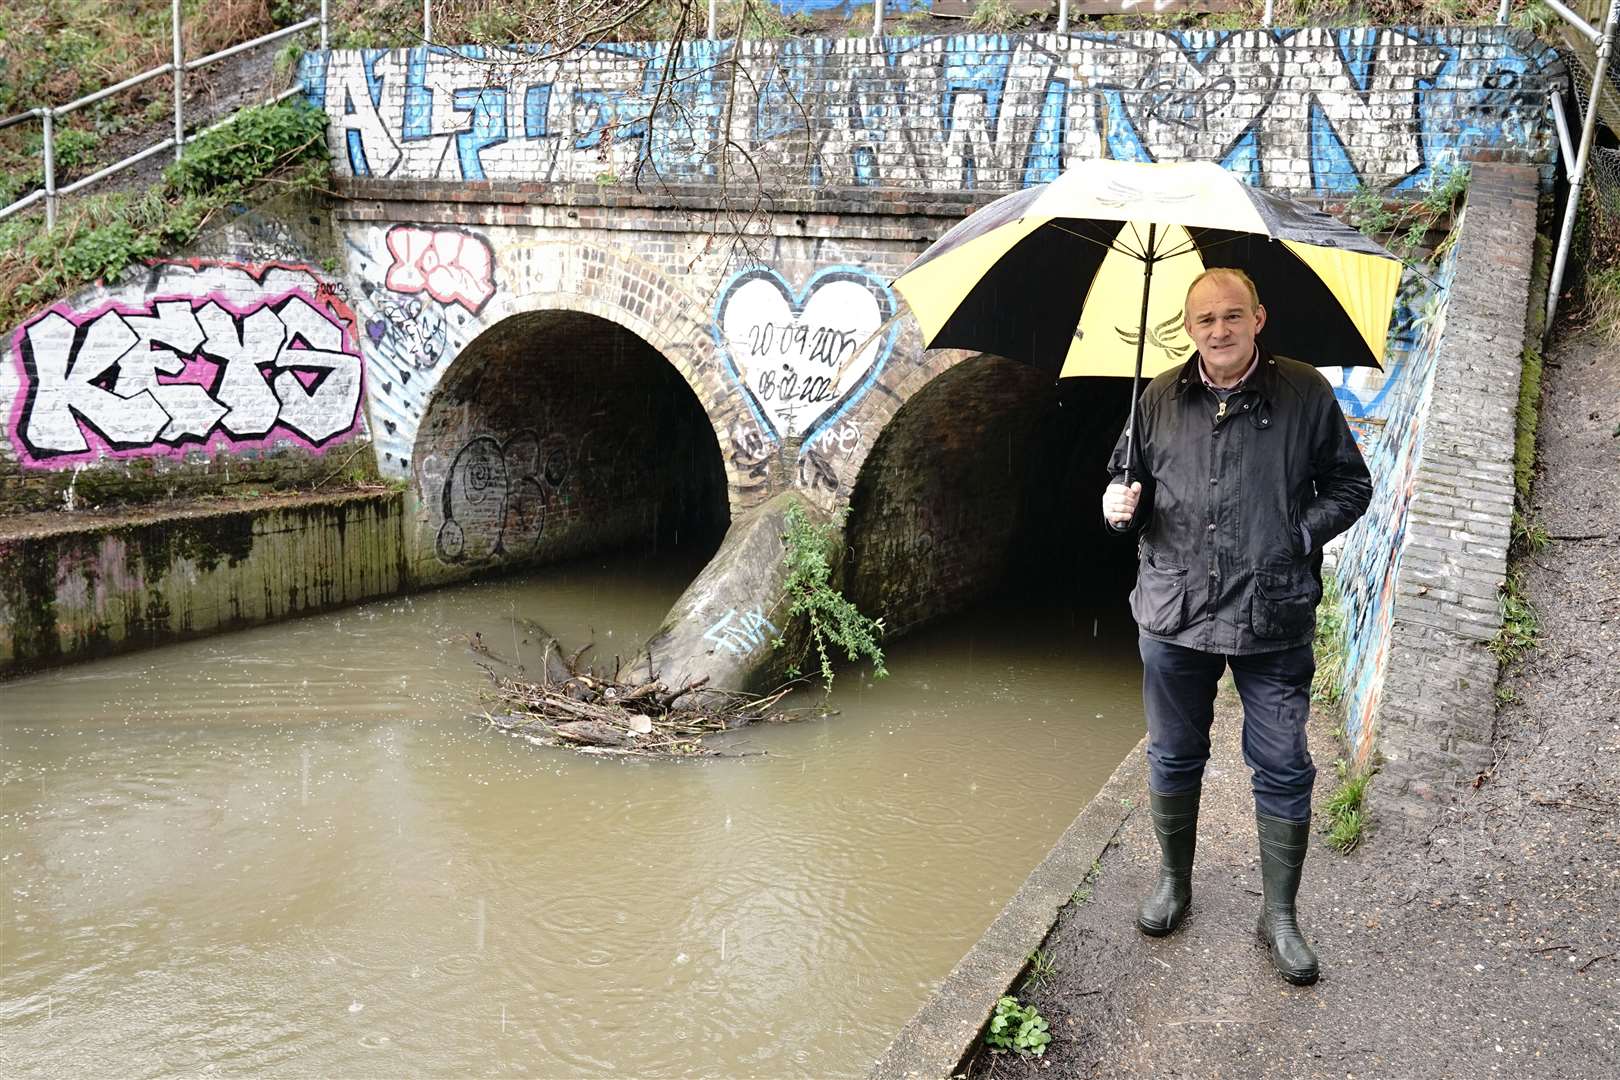 Liberal Democrat leader Sir Ed Davey by the Hogsmill River in Berrylands, south-west London (Aaron Chown/PA)